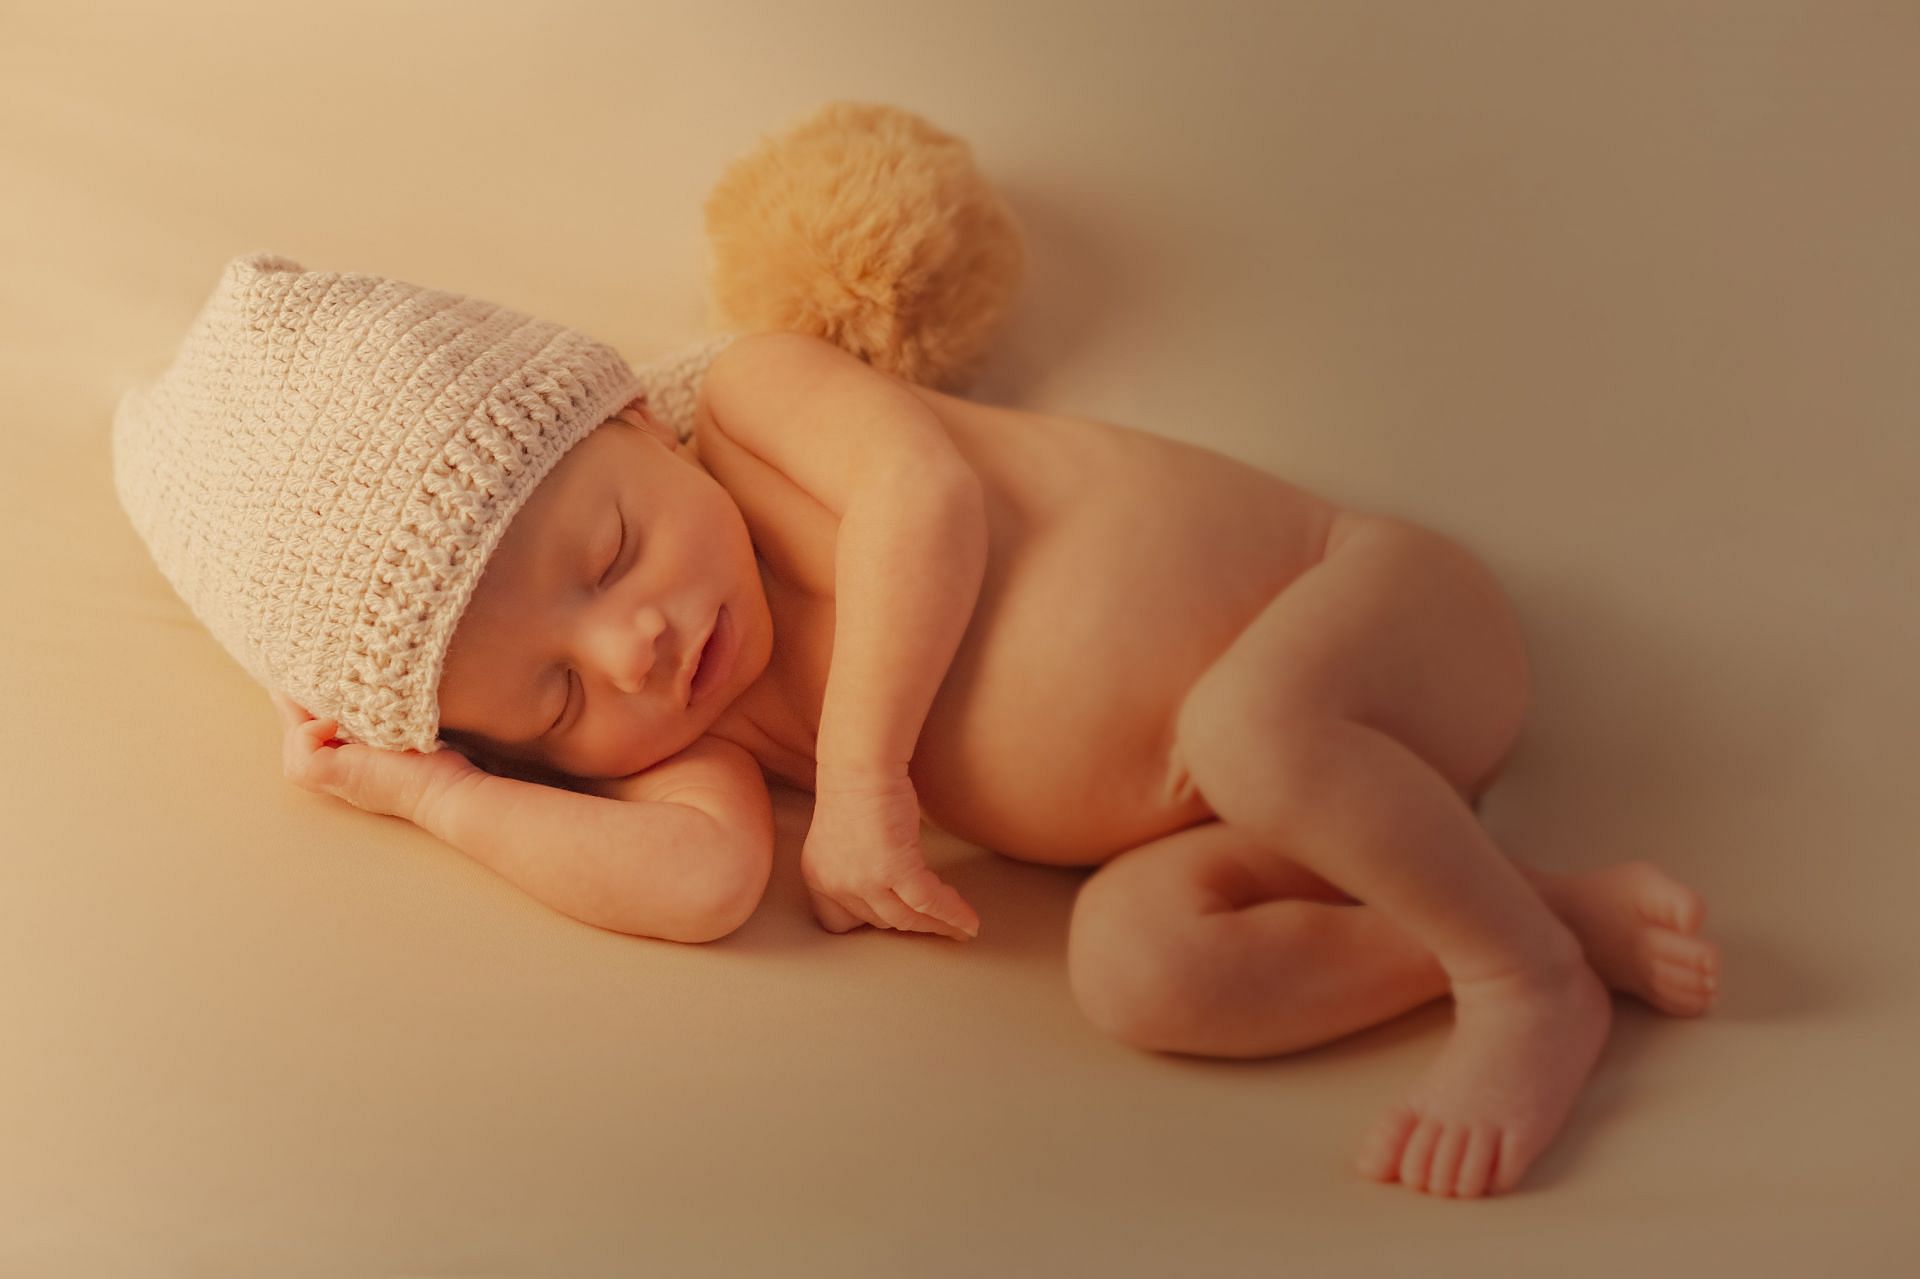 Newborn hiccups almost always go away on their own. (Image via Pexels/Gabriel Tapia)